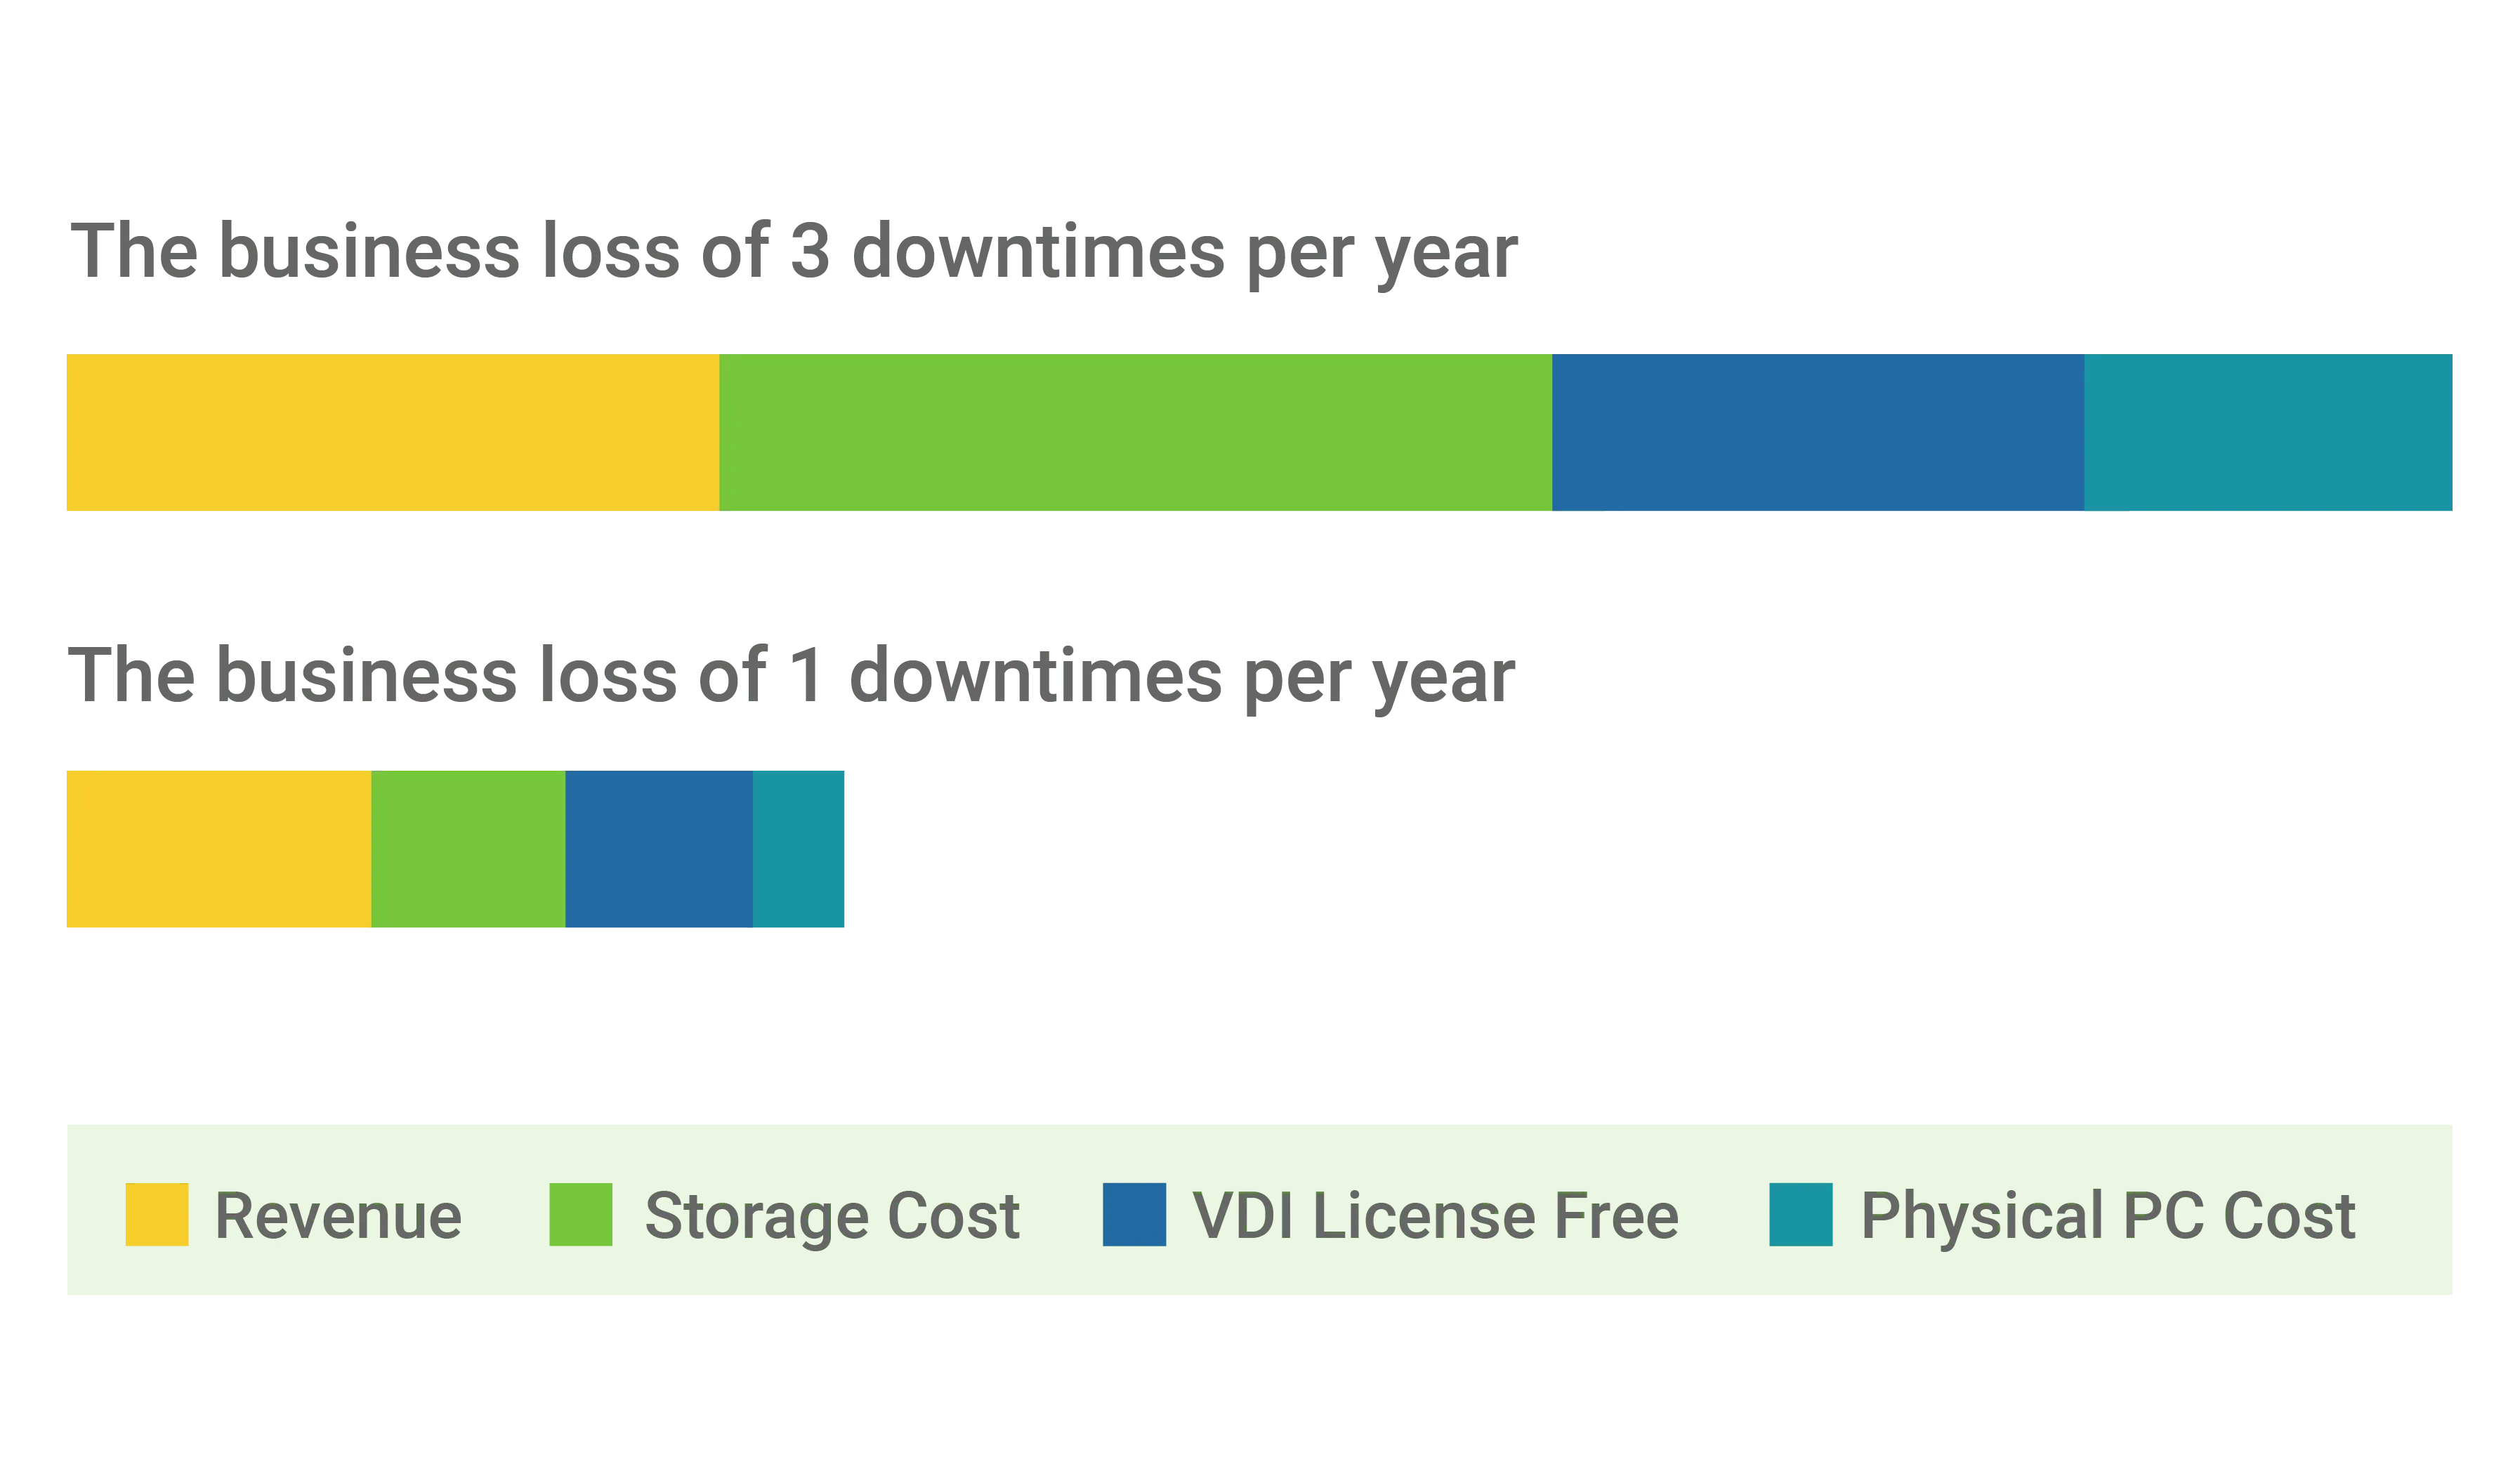 Business loss of downtime every year